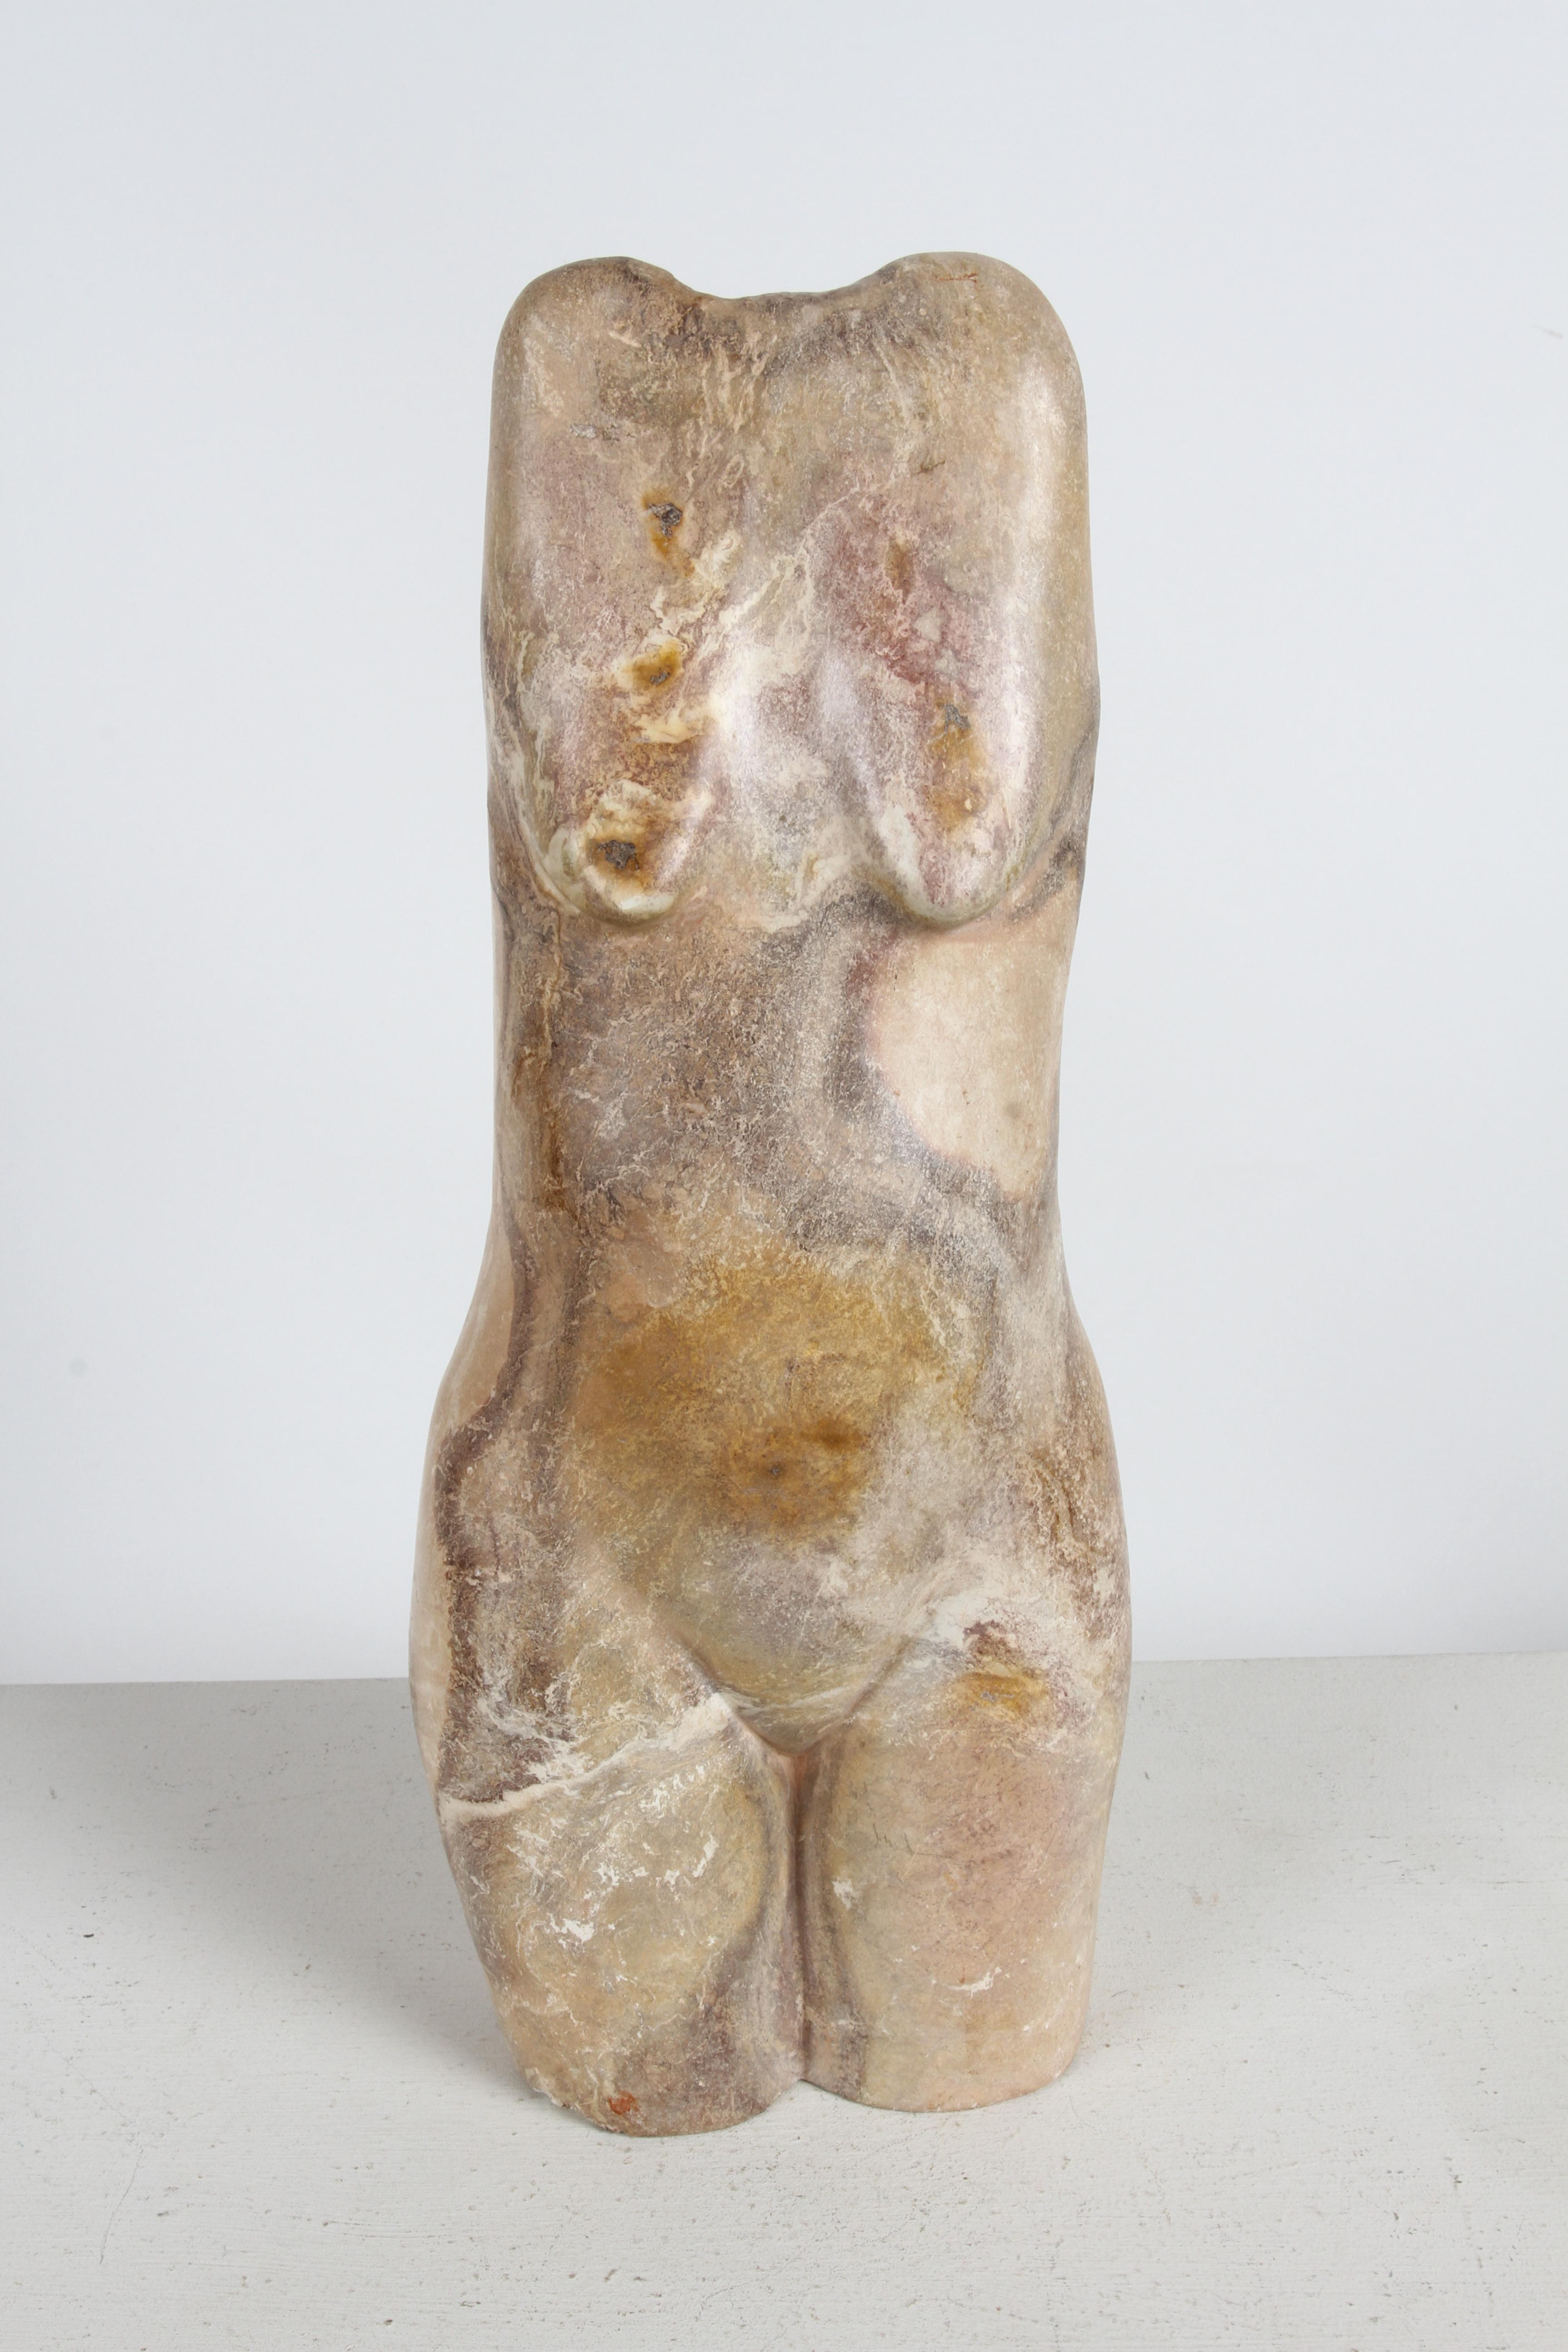 1980s hand-carved by unknown artisan of a modernist form female nude torso sculpture made of Lebanon marble. Something written Indiscriminately on underside and possible date of 1984. 

In the style of Massimo Villani Sculptor .

Massimo Villani was